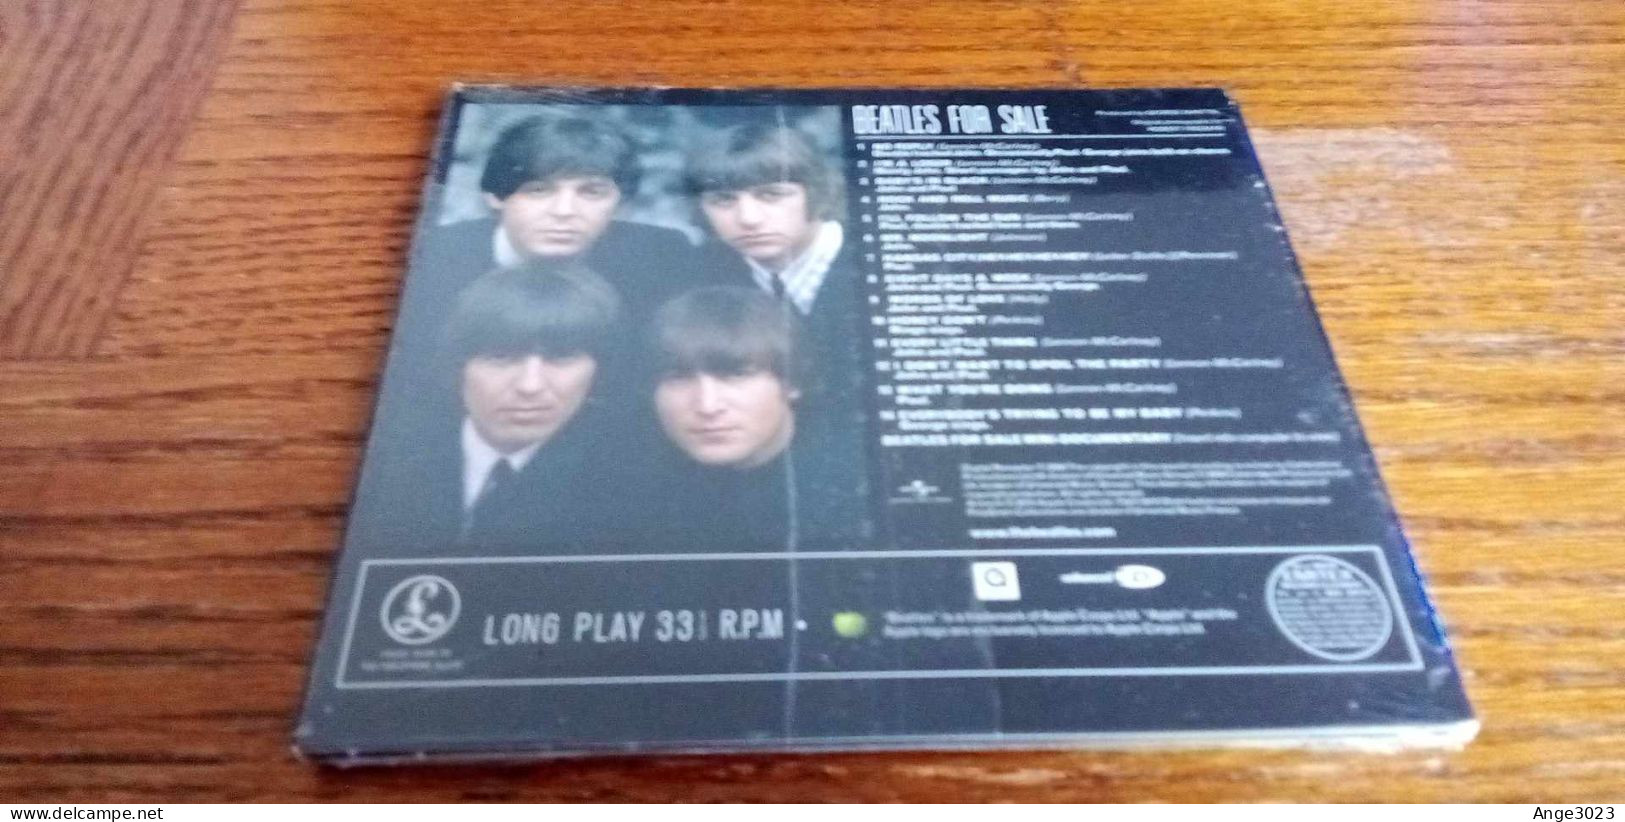 THE BEATLES "Beatles For Sale" - Rock